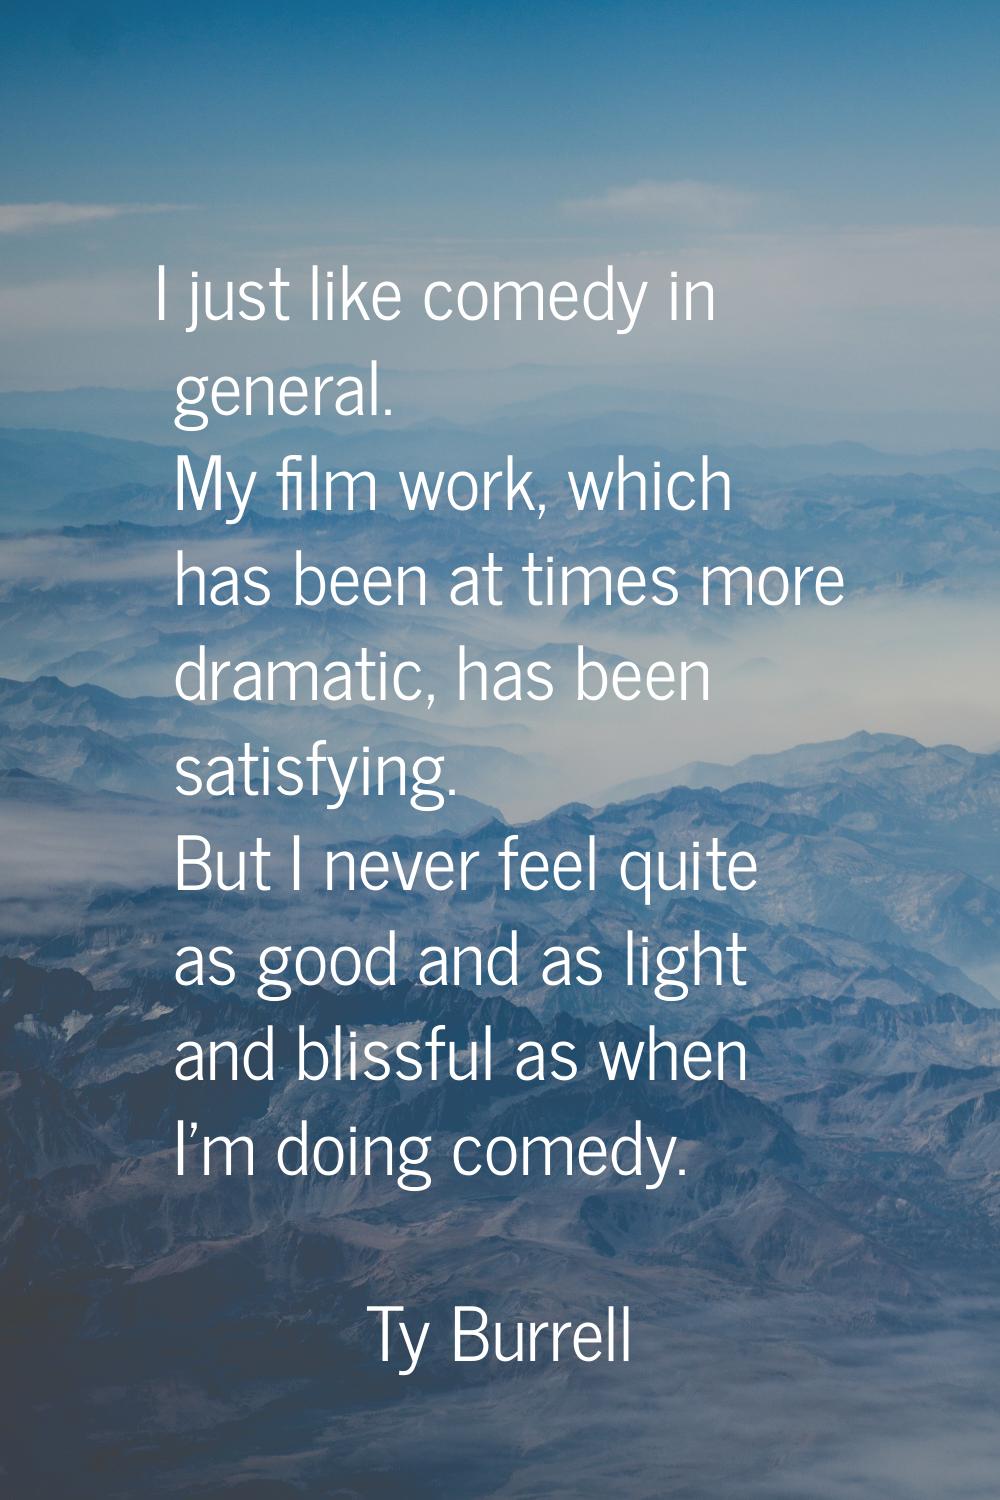 I just like comedy in general. My film work, which has been at times more dramatic, has been satisf